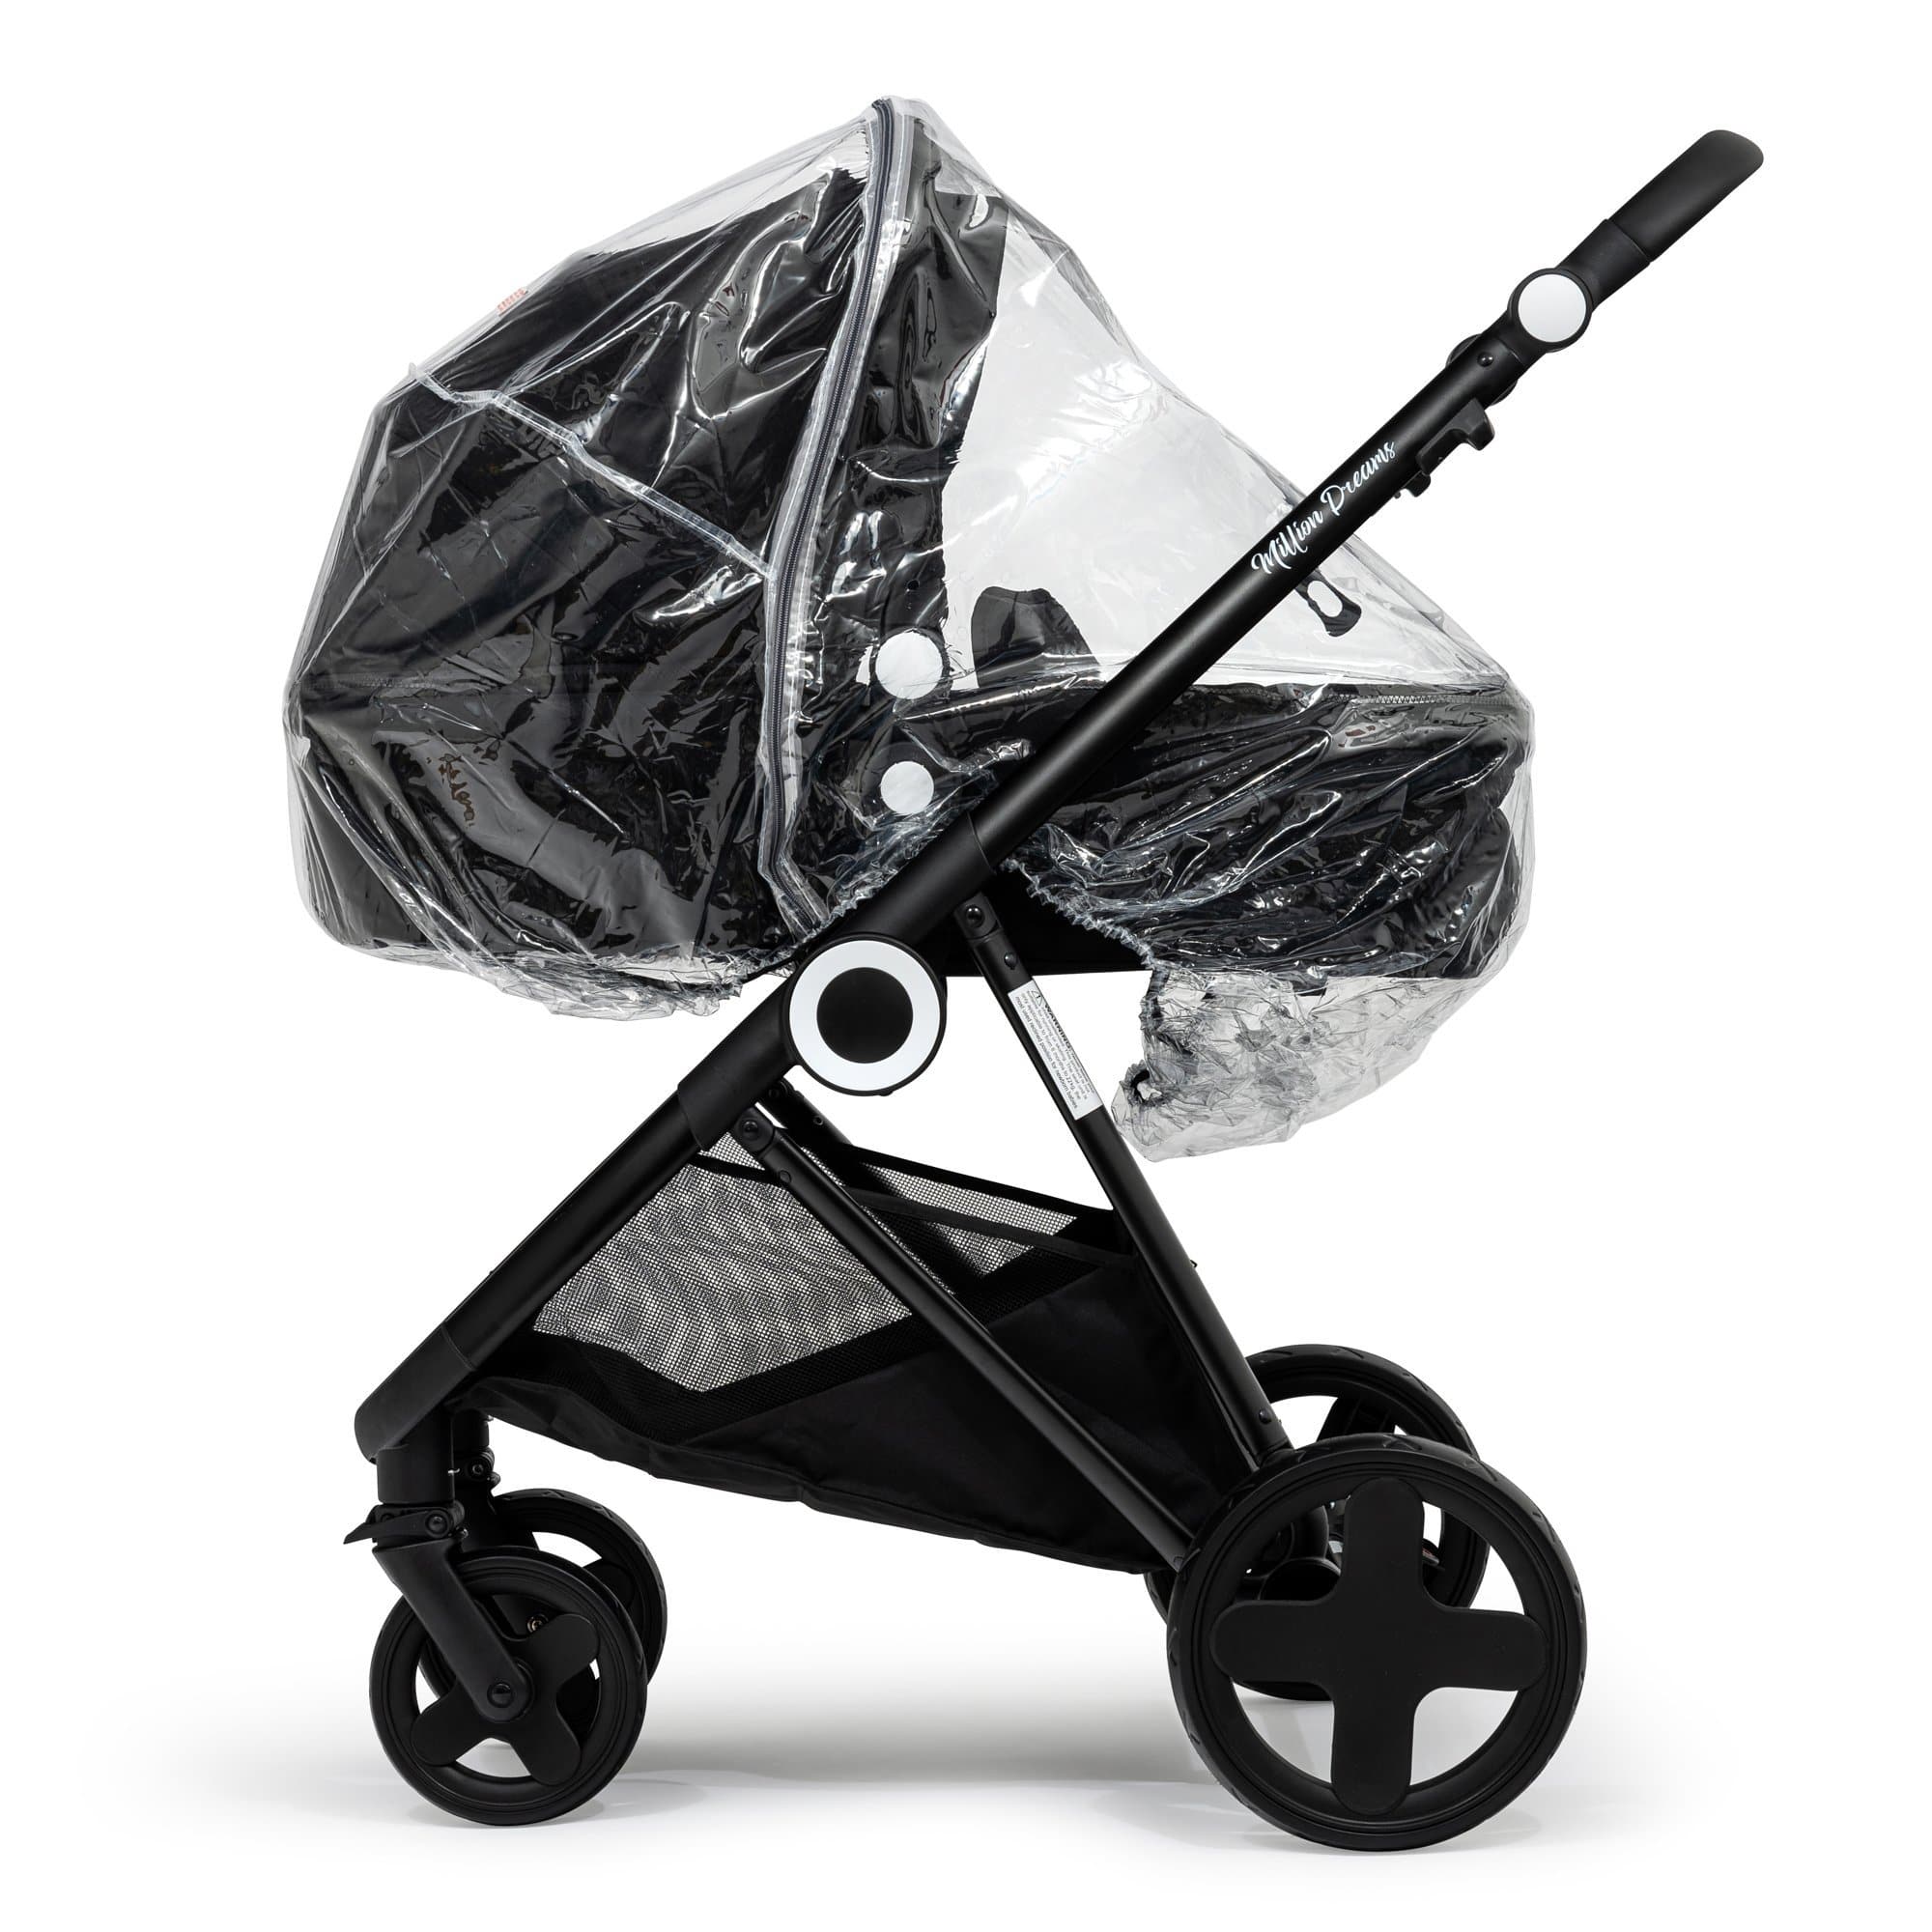 2 in 1 Rain Cover Compatible with Concord - Fits All Models - For Your Little One